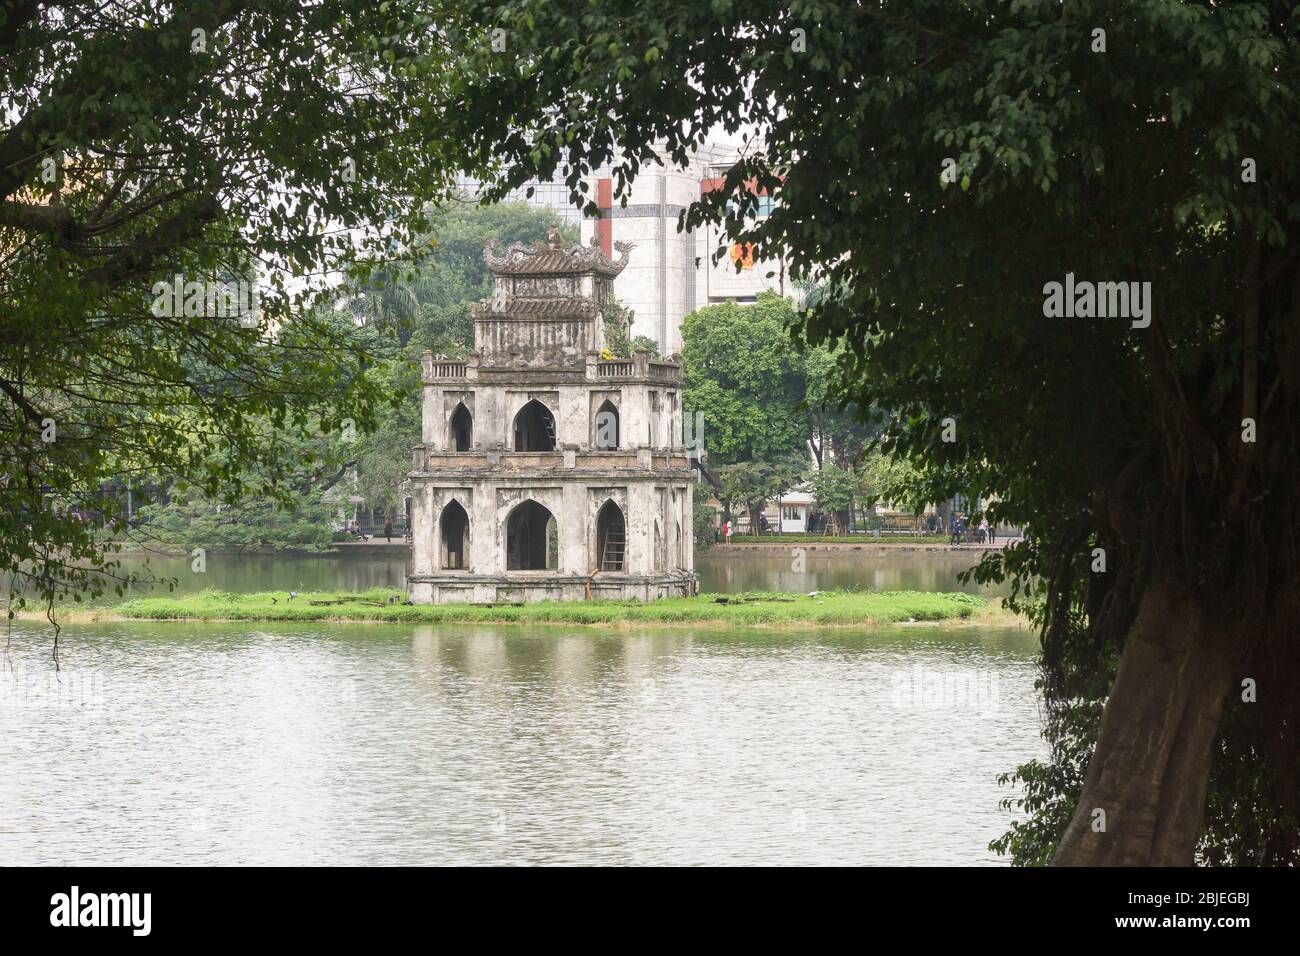 Hanoi Turtle Tower - Hoan Kiem Lake in Hanoi with Turtle Tower in the background. Vietnam, Southeast Asia. Stock Photo